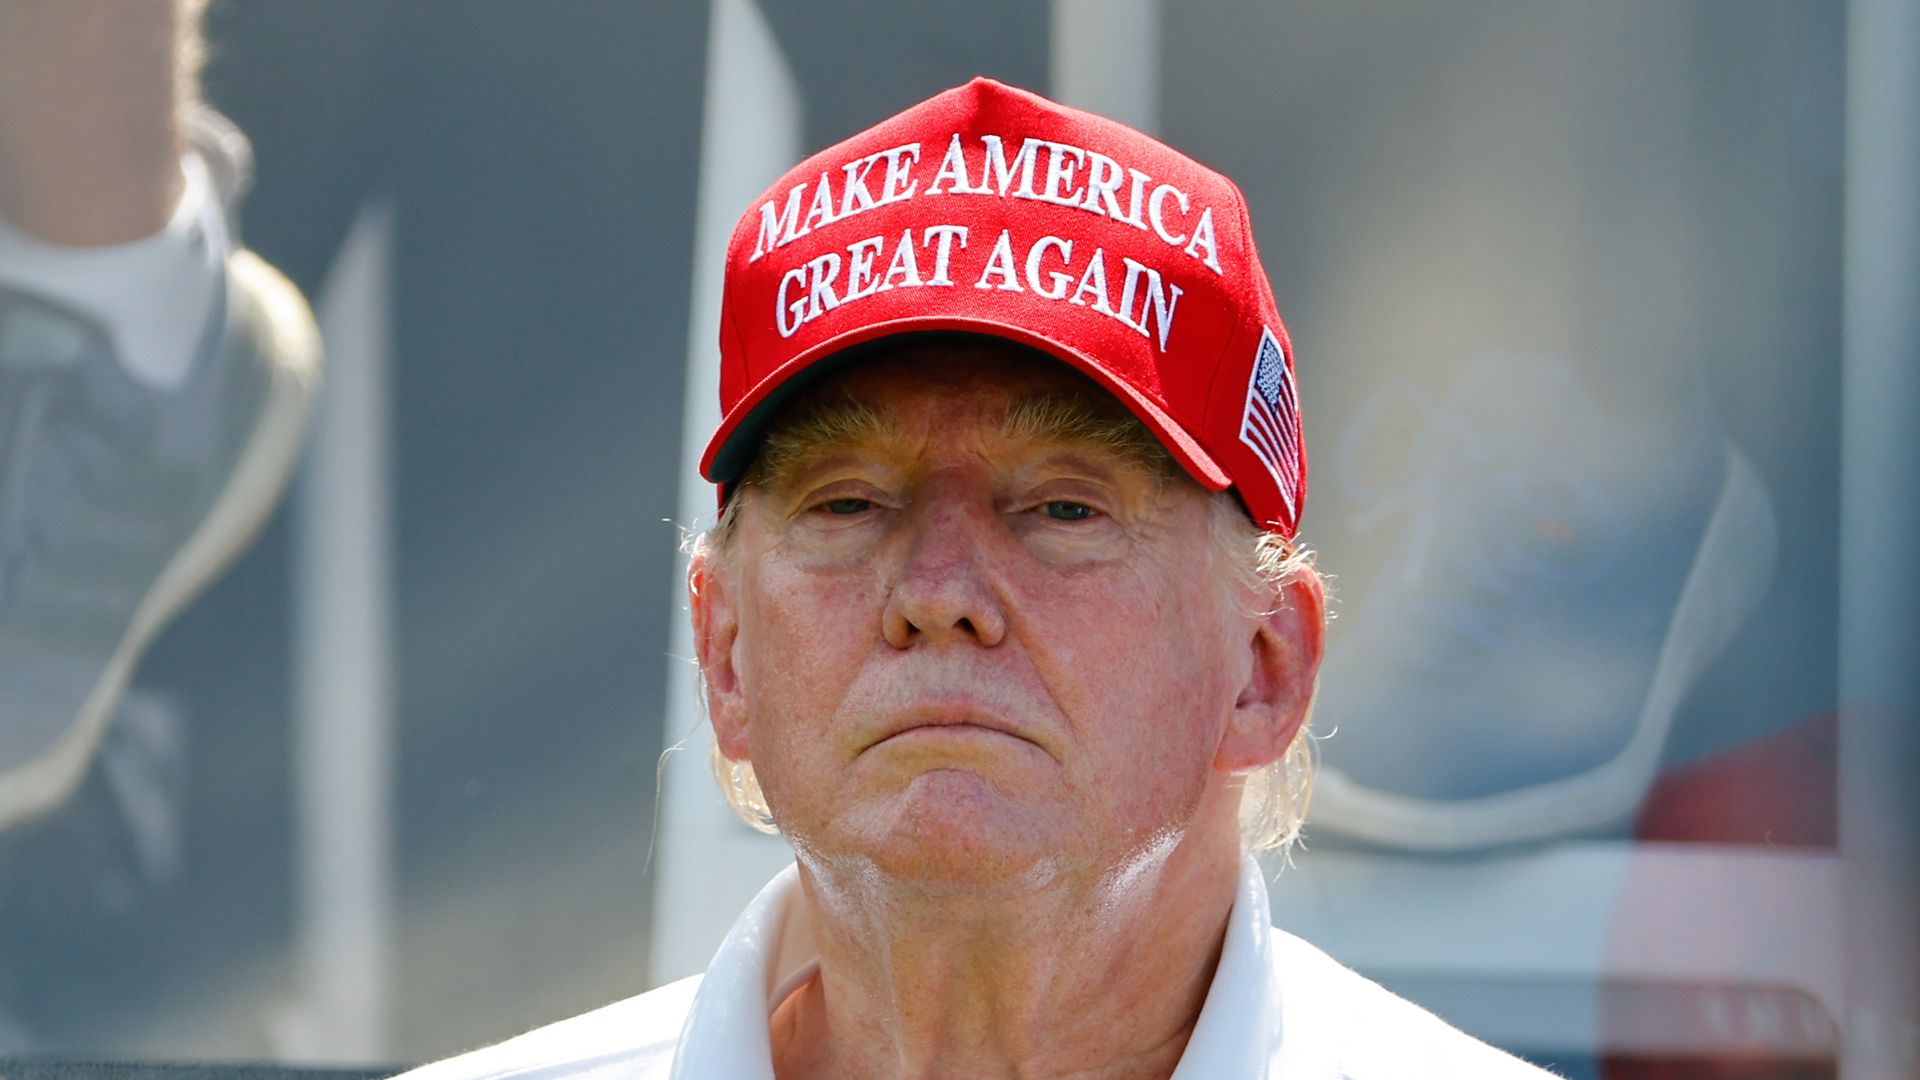 Former President Trump in a red cap that says "Make America Great Again."